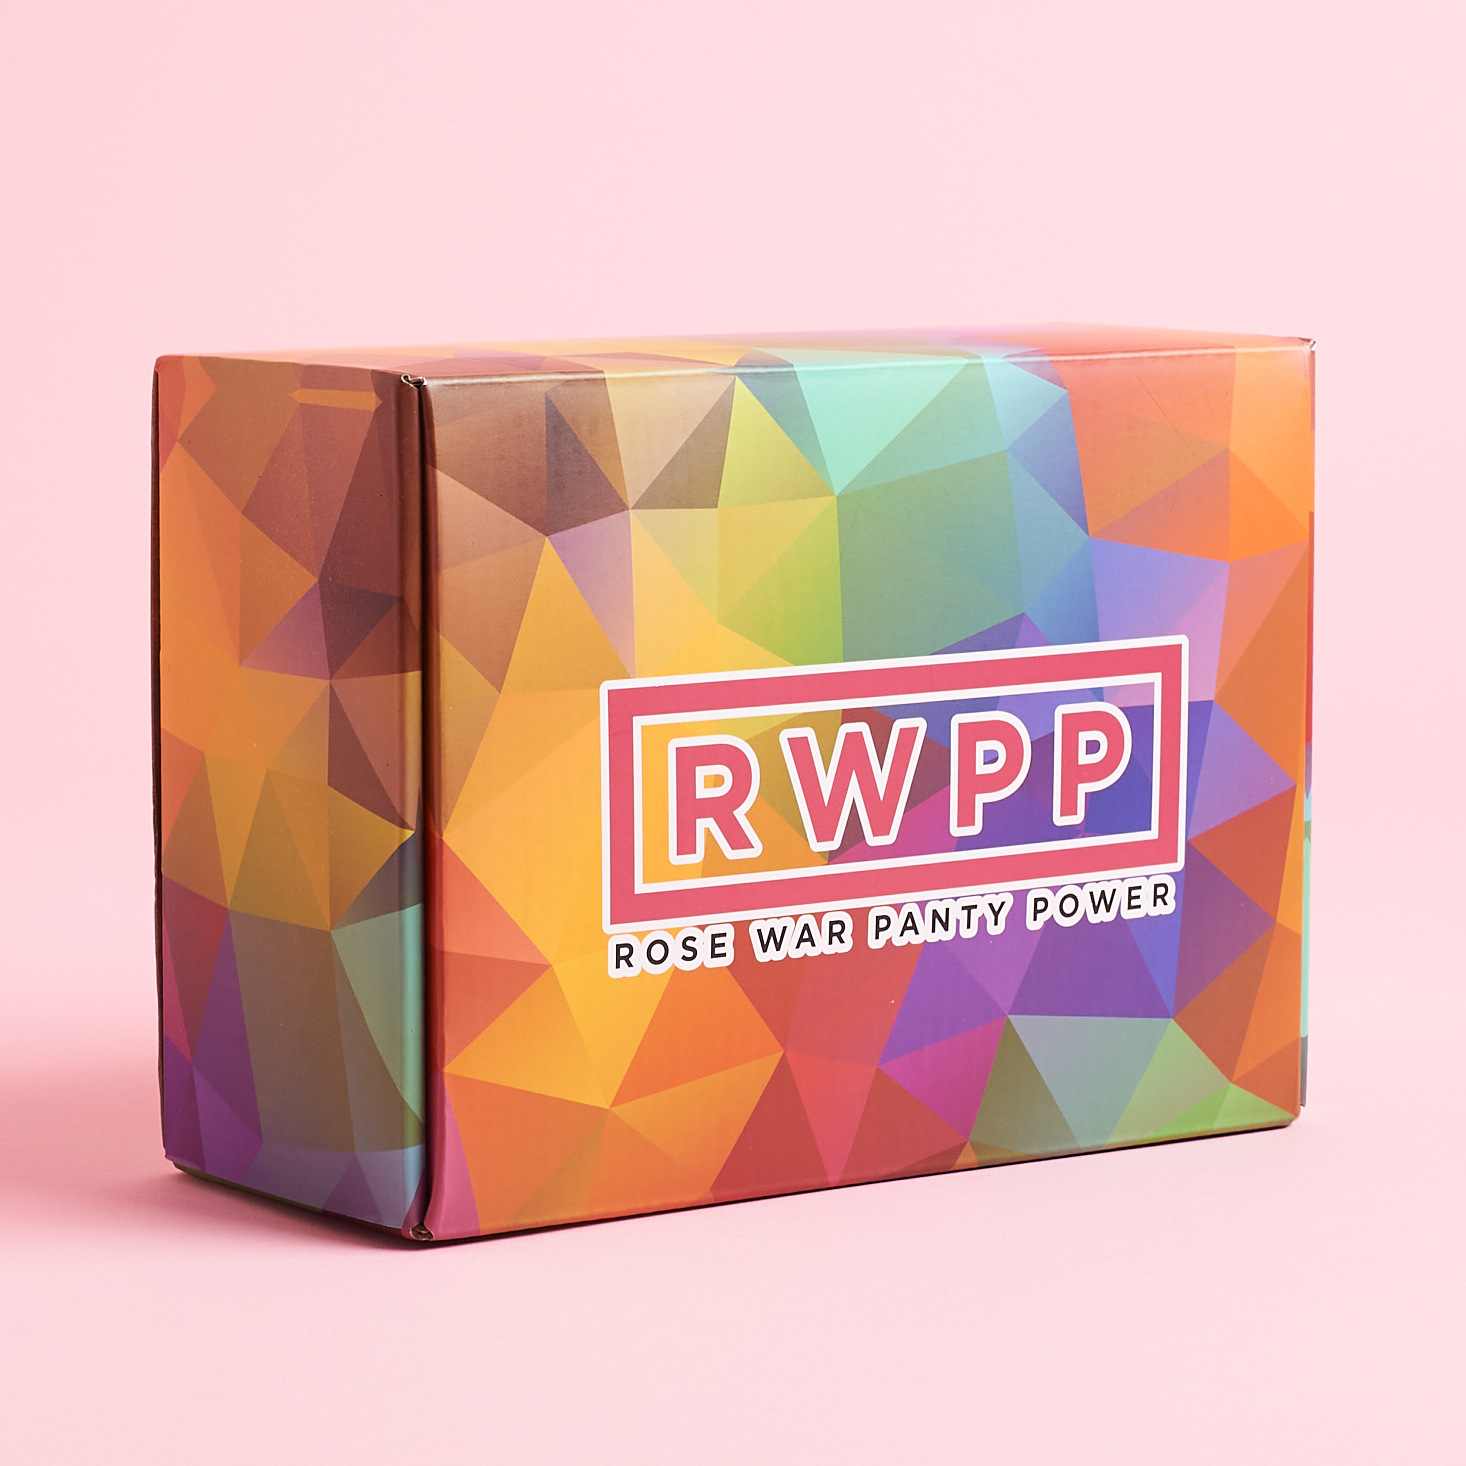 Rose War Panty Power Review + Coupon – February 2021